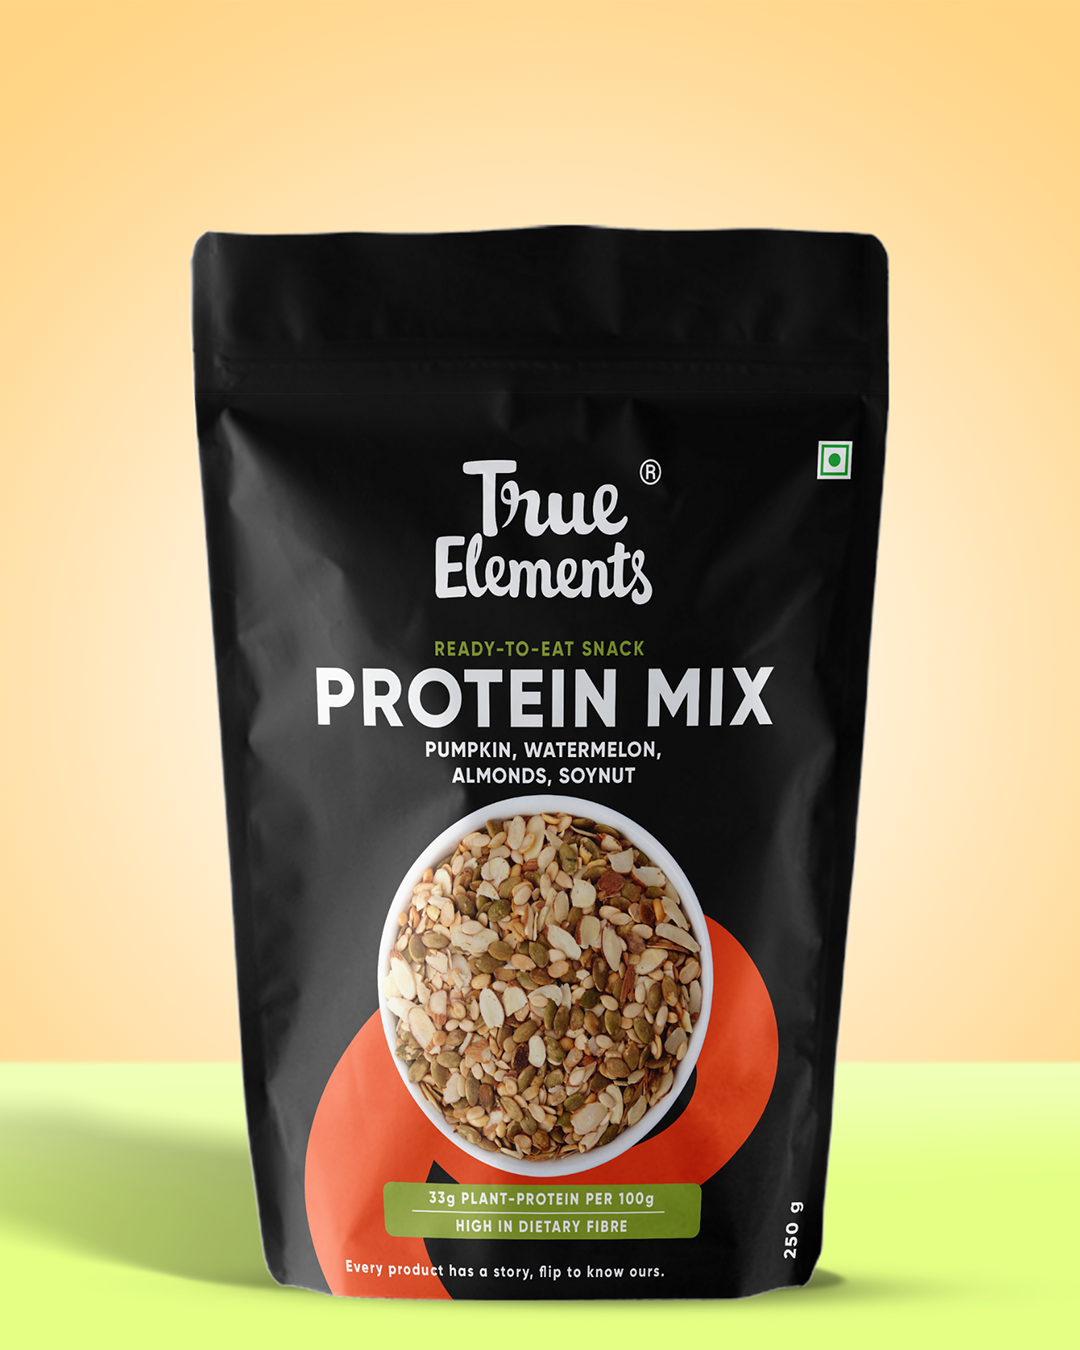 Protein mix with pumpkin, watermelon, almonds & soy in 250g pouch.